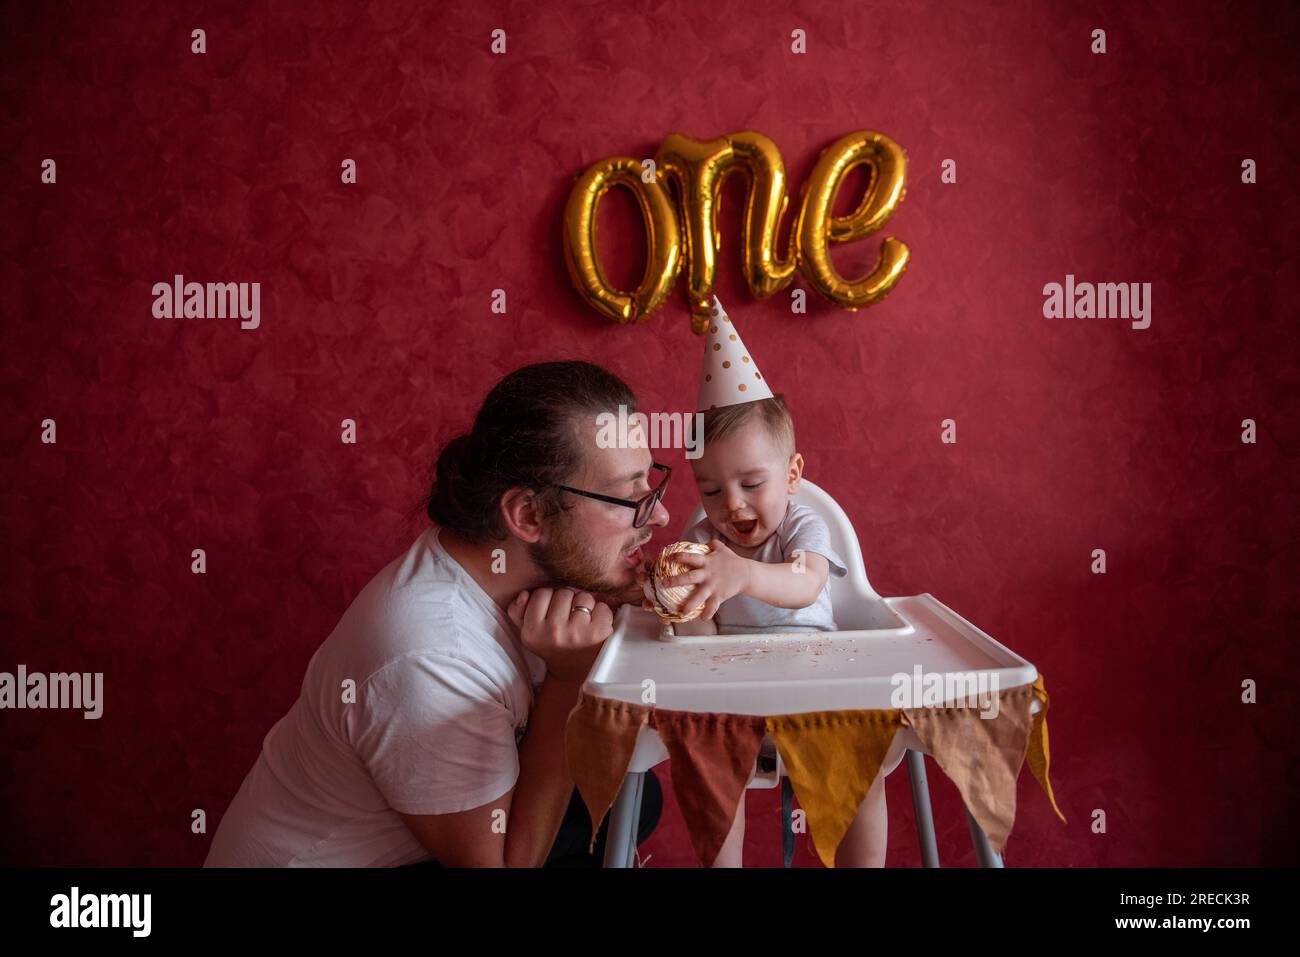 Father celebrates with little son his first birthday. Man fooling around with boy, eats holiday cake against red wall background with One foil balloon Stock Photo